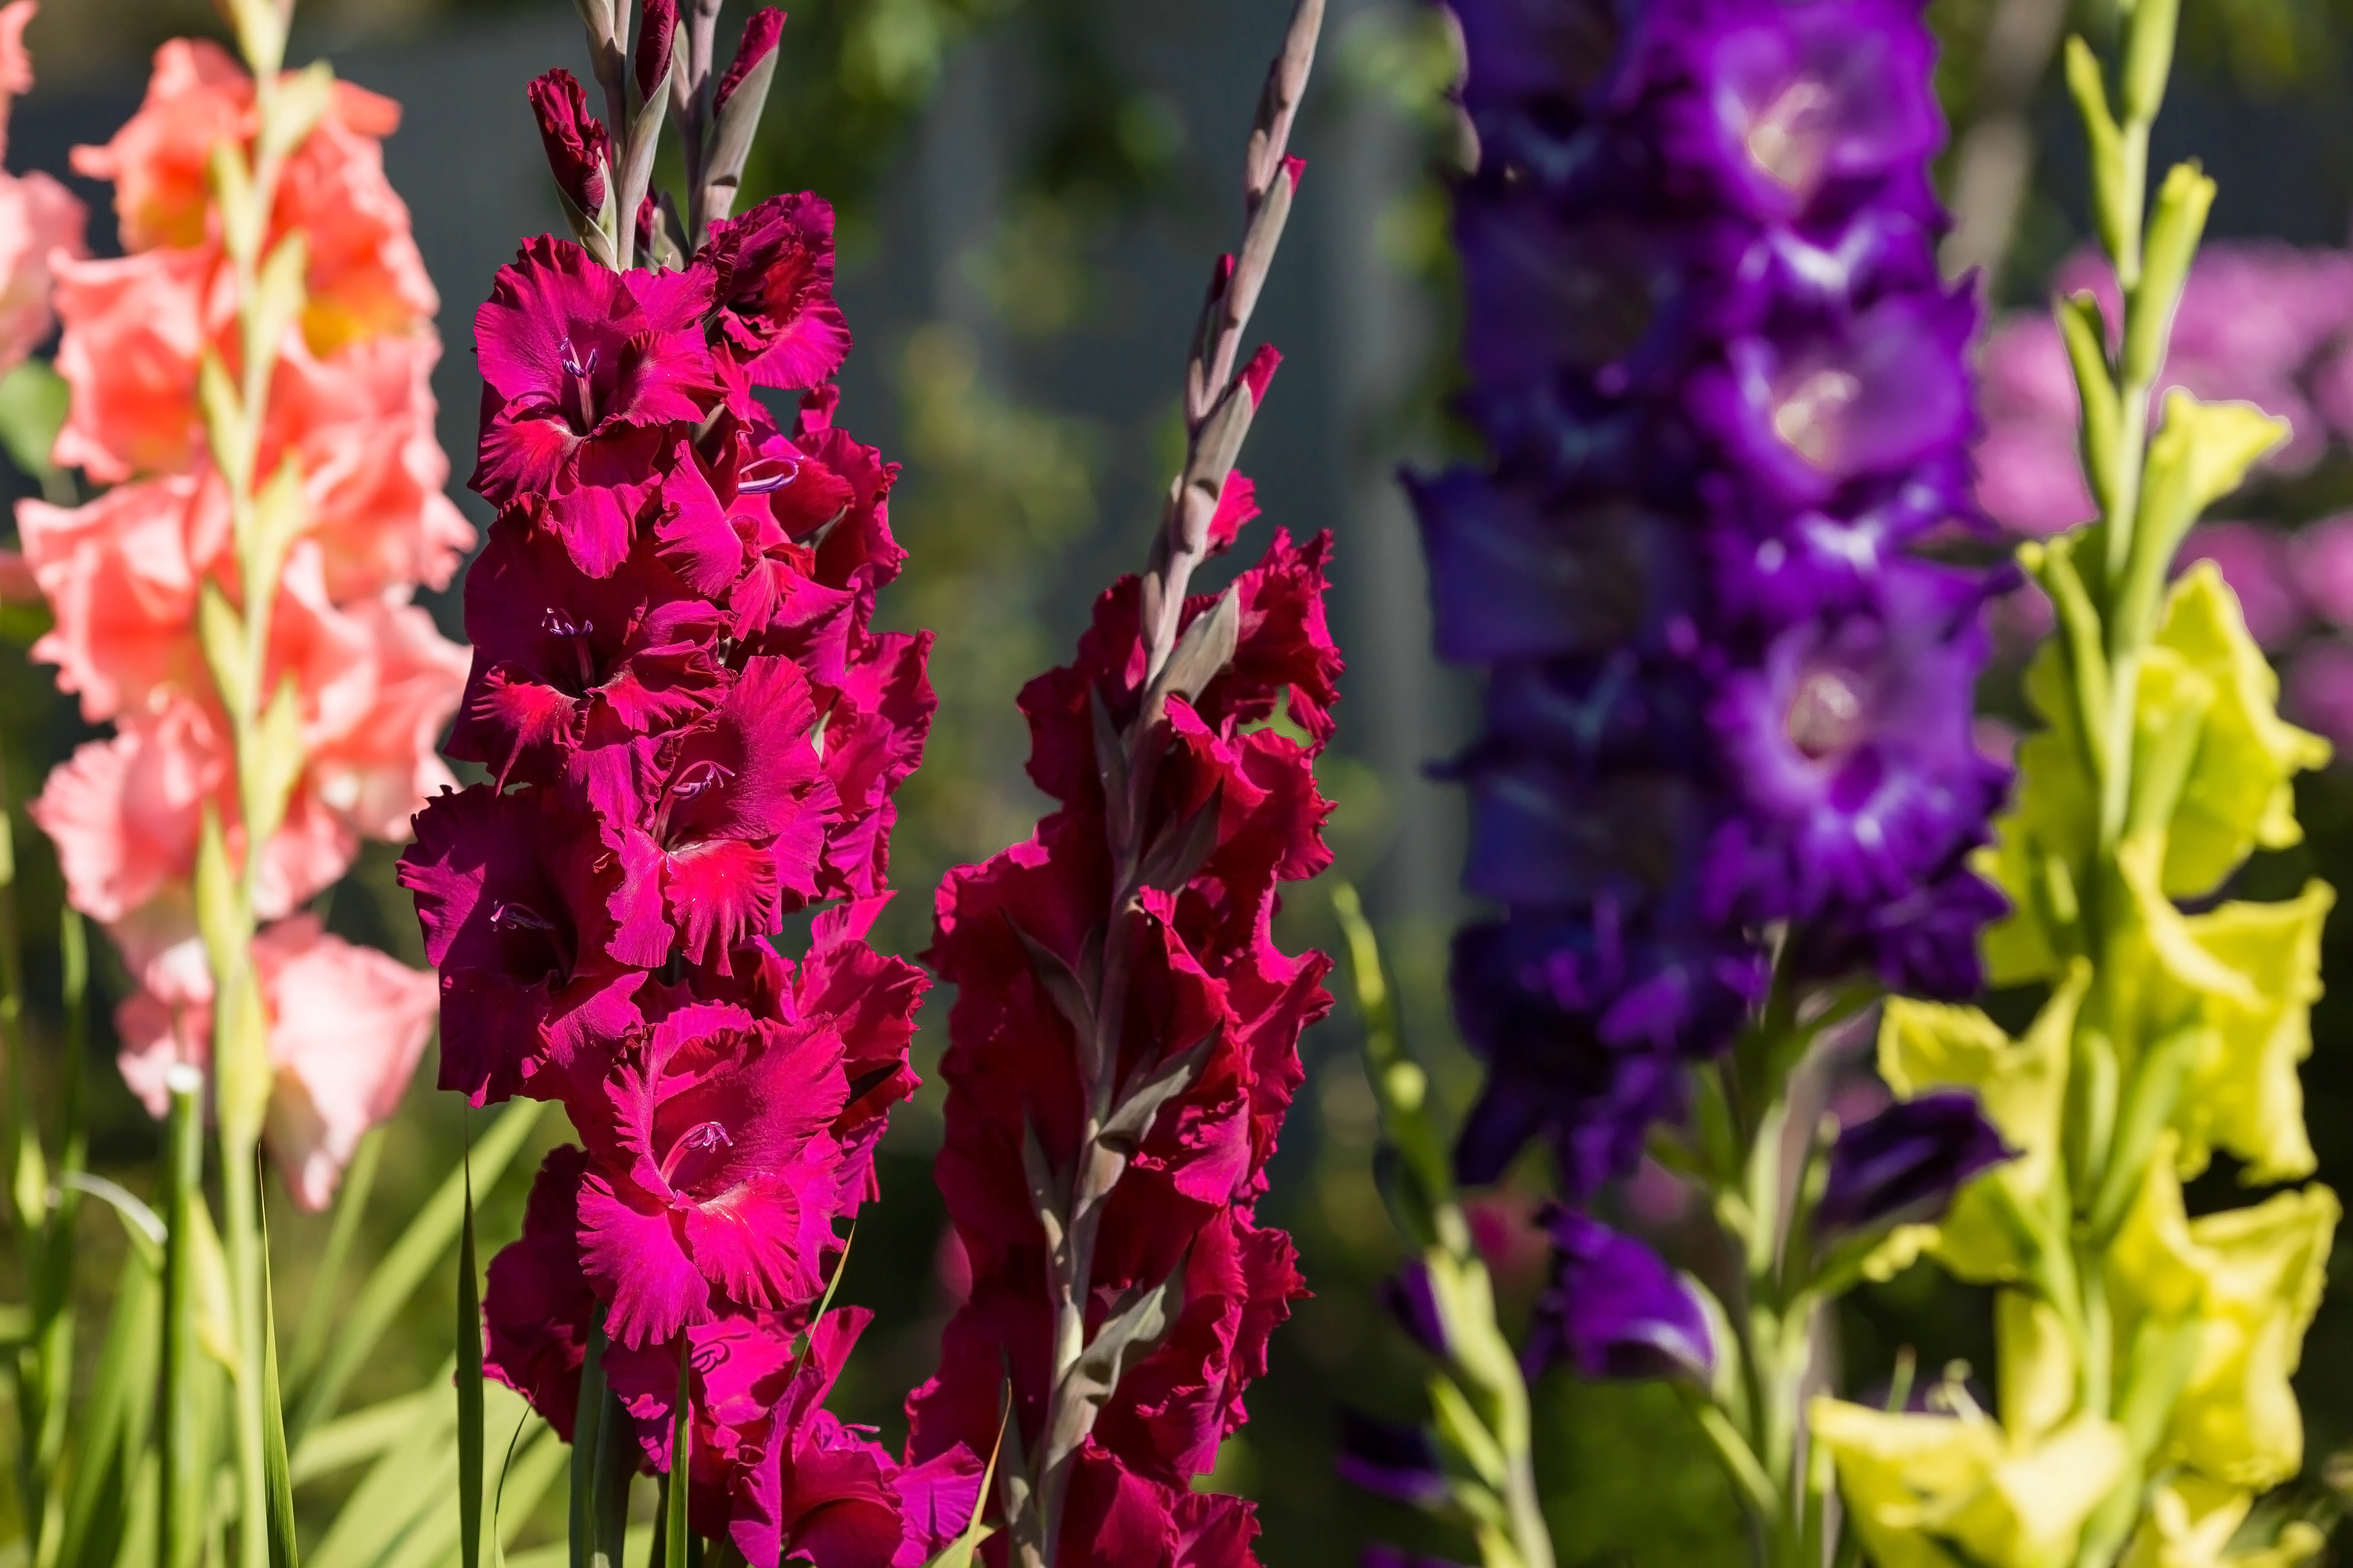 When to plant gladioli: for magnificent, showy blooms